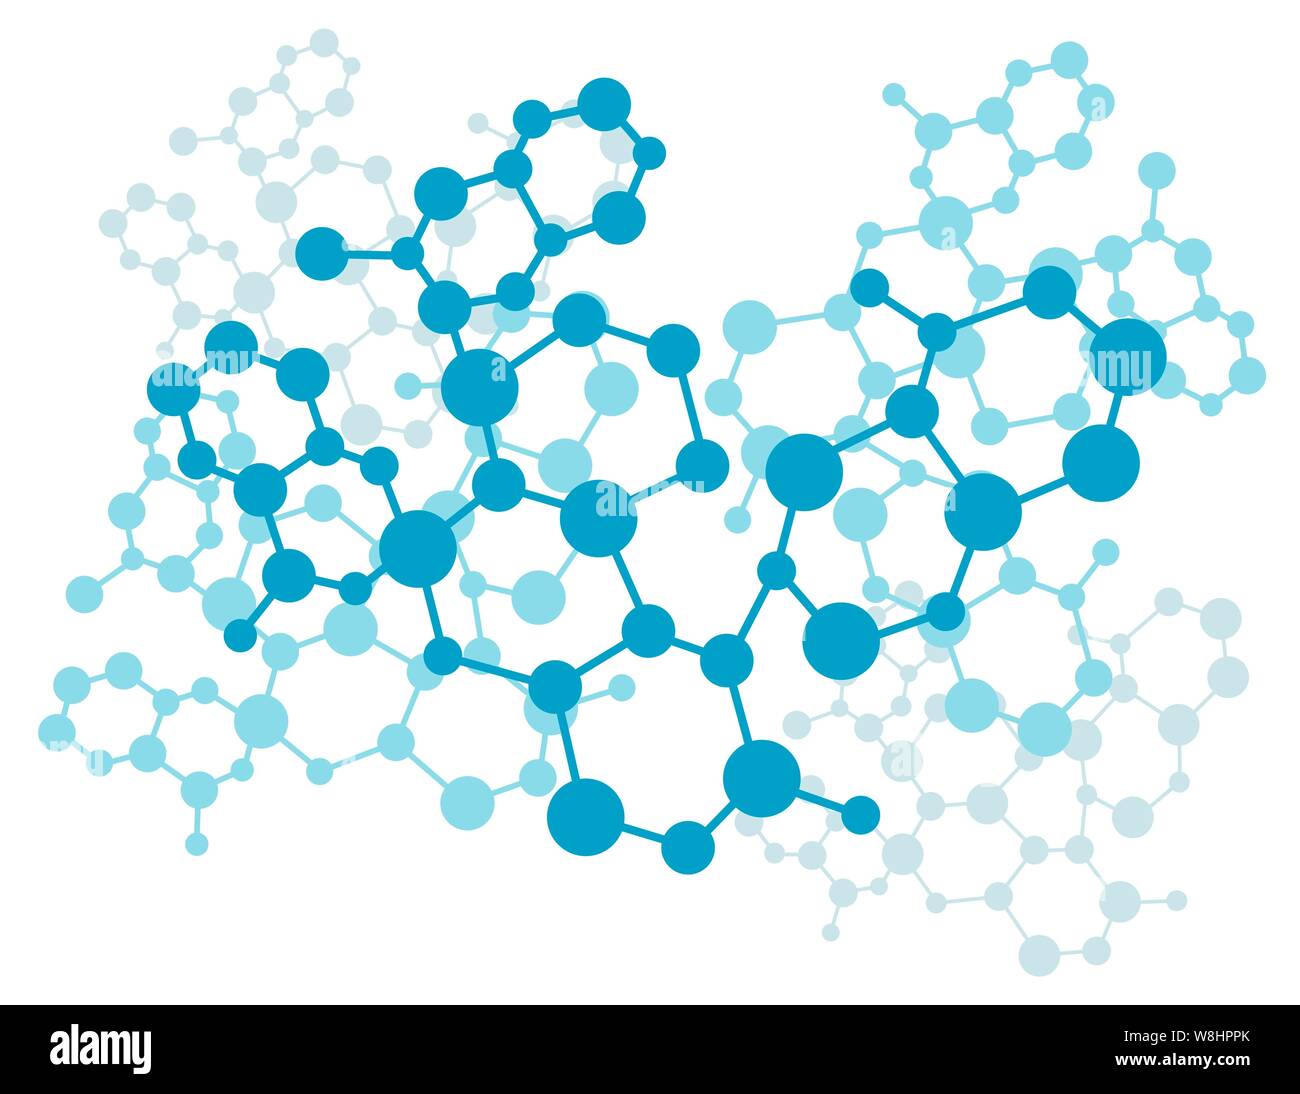 Abstract background with molecular icons. Stock Photo